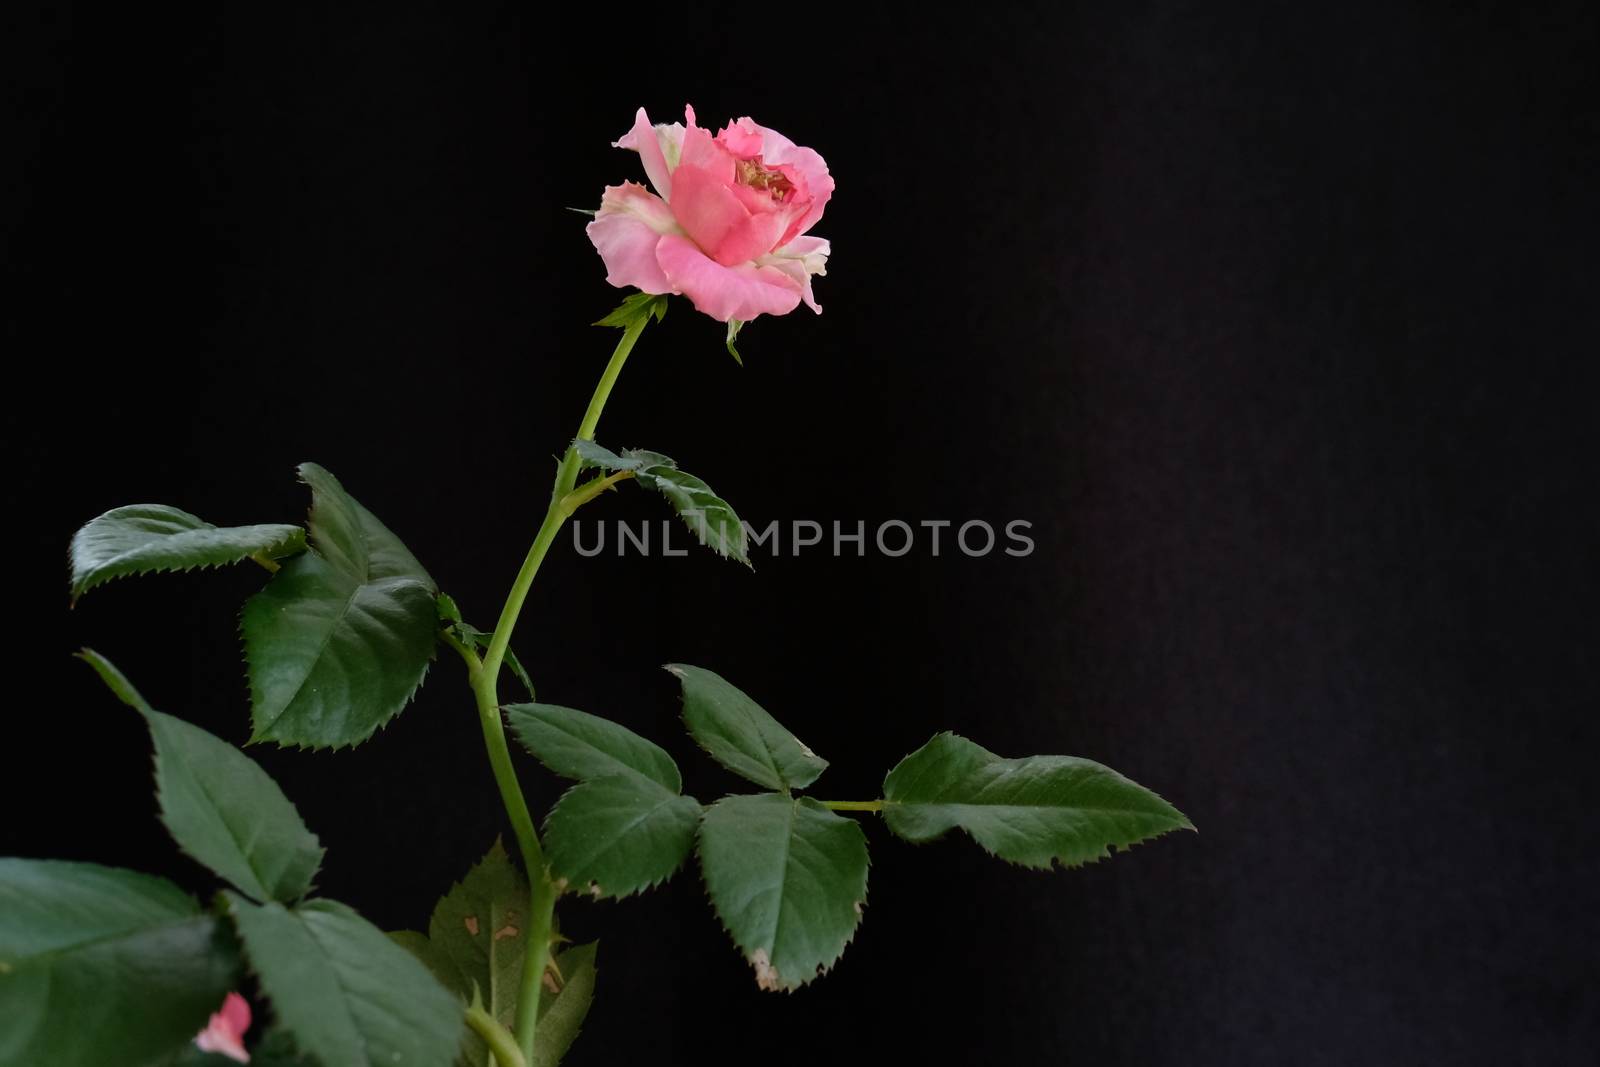 pink rose flower with stem and leaves isolated on black background by Macrostud